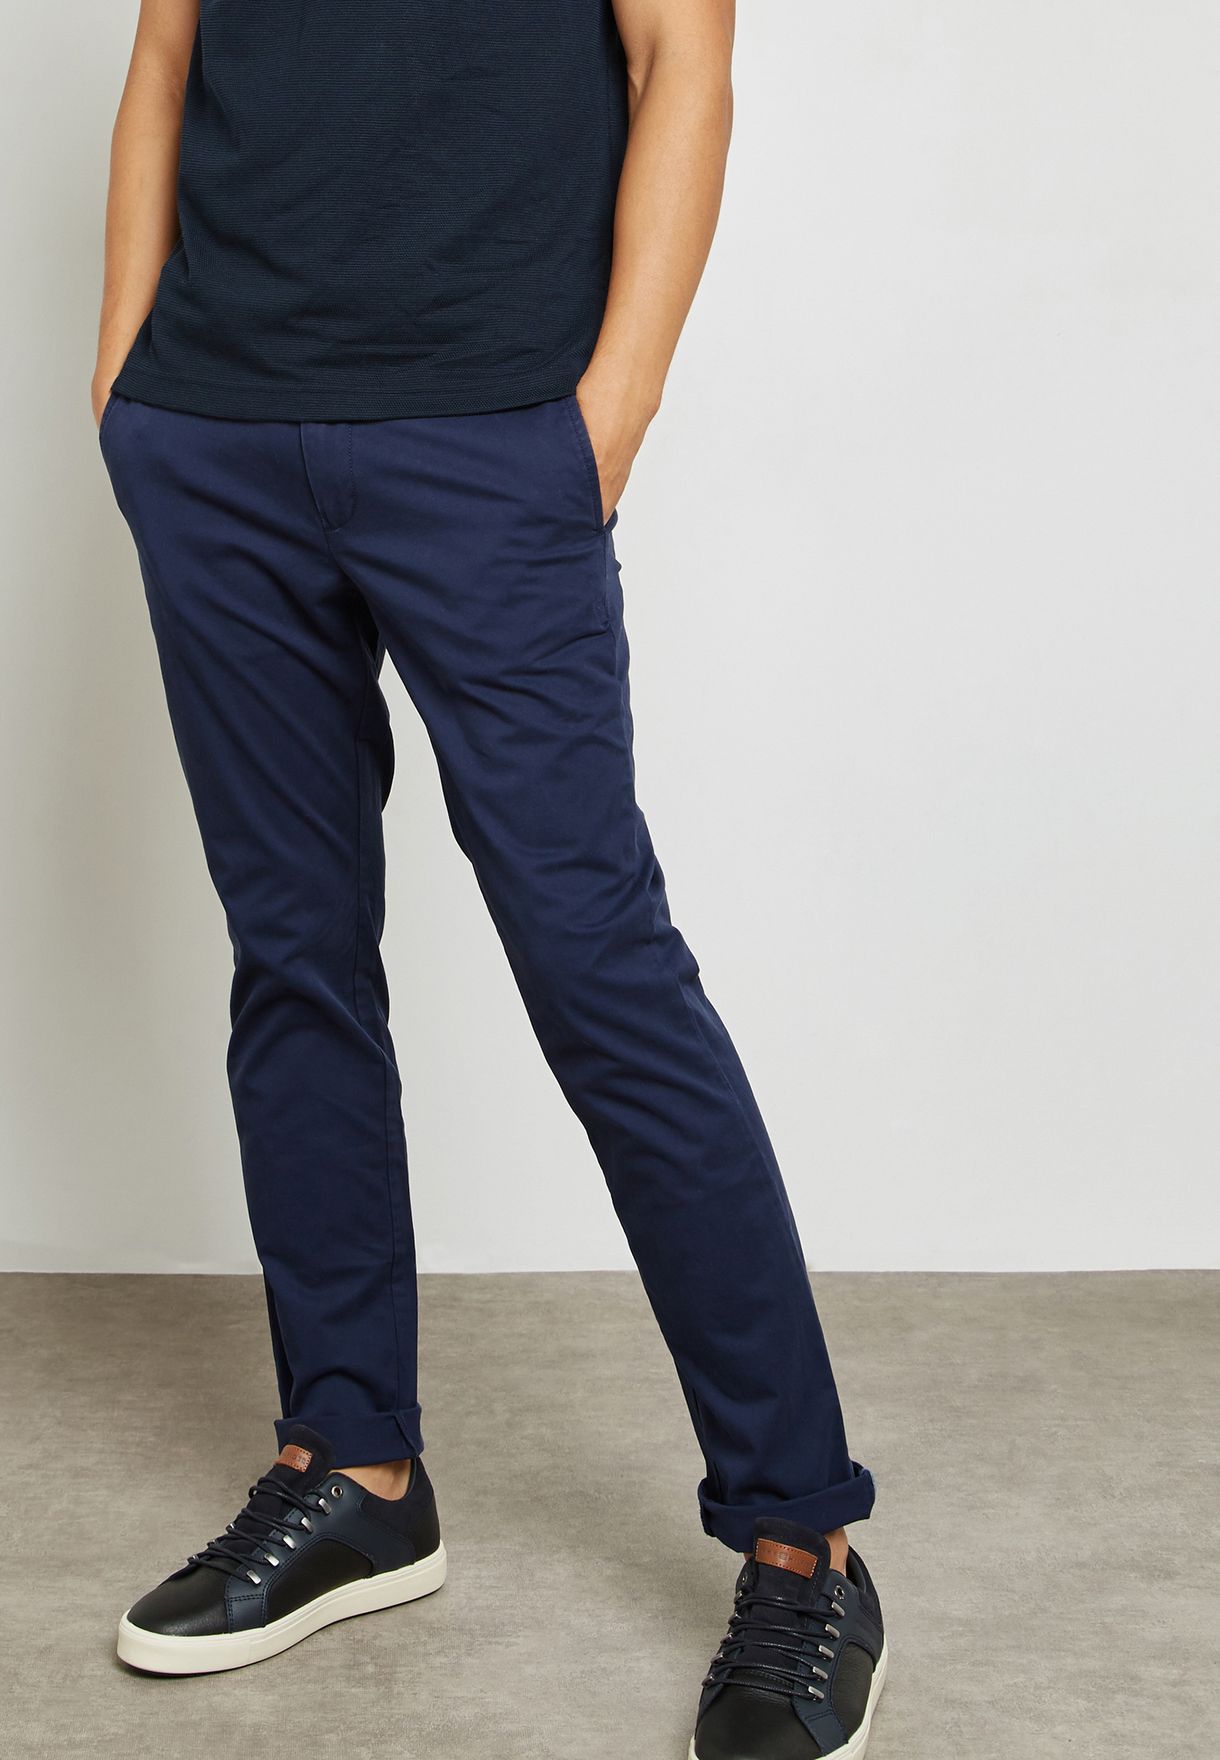 Buy > tommy hilfiger bleecker chino slim fit > in stock